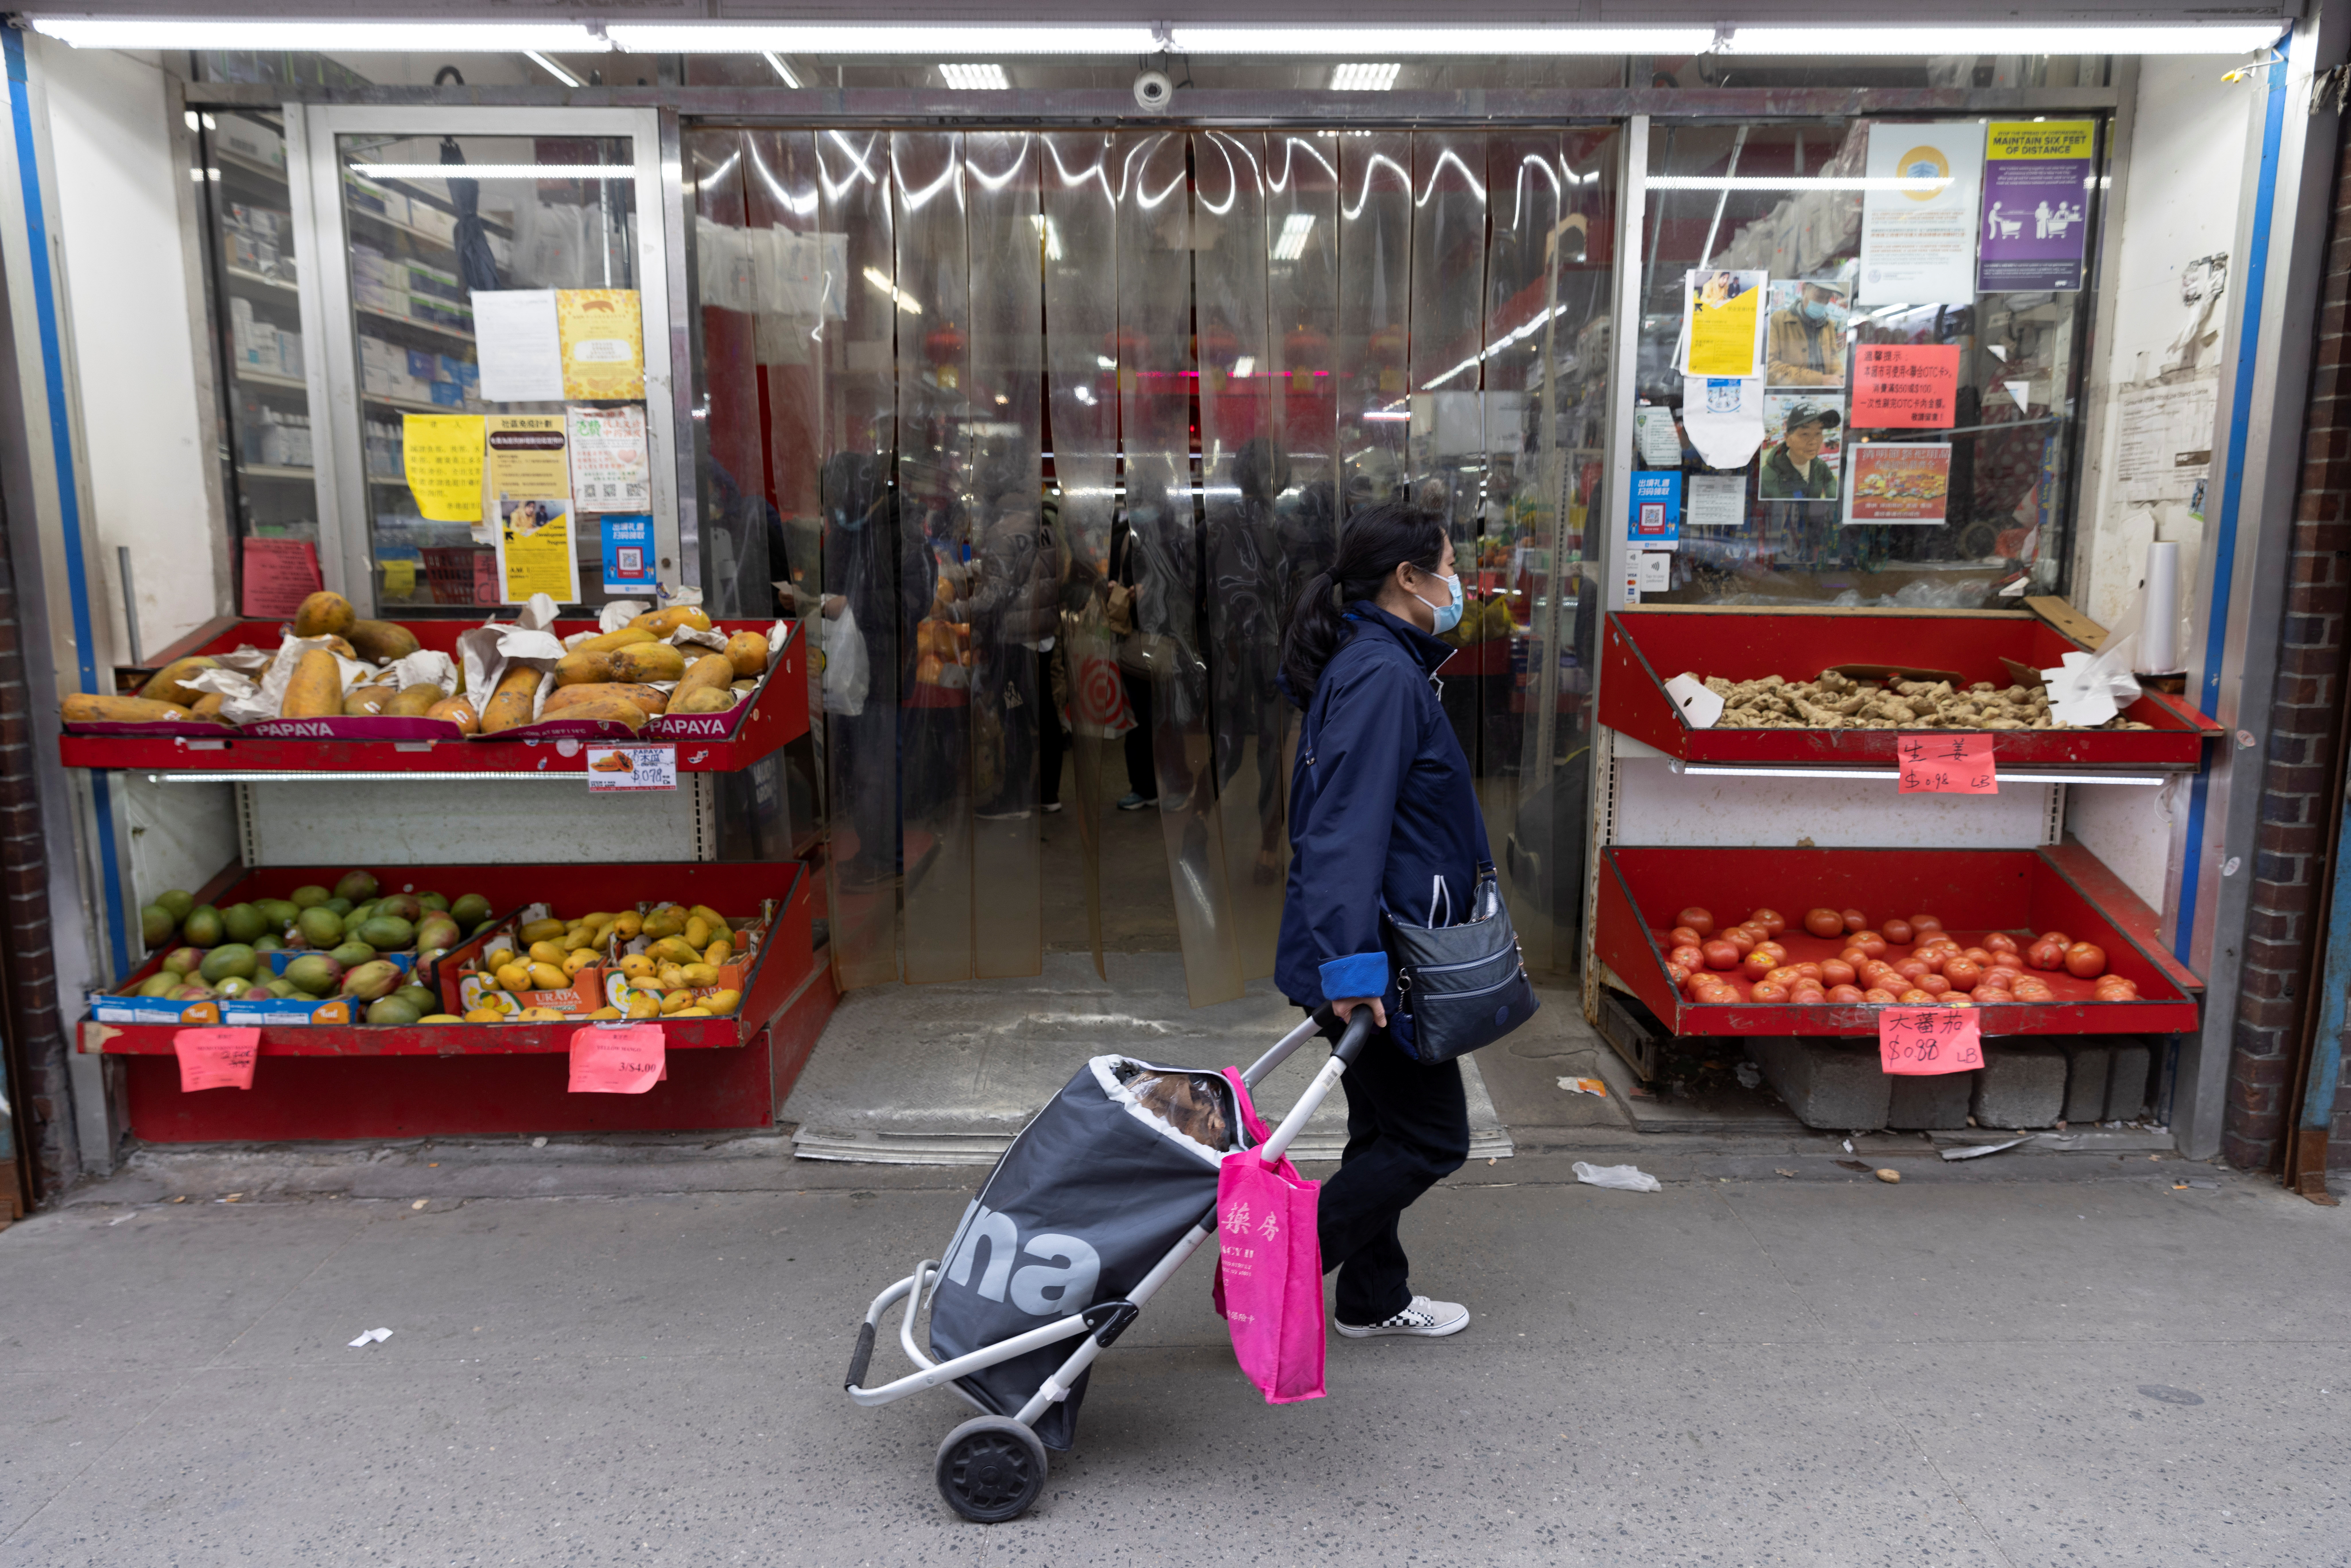 A person walks past a grocery store in Manhattan, New York City